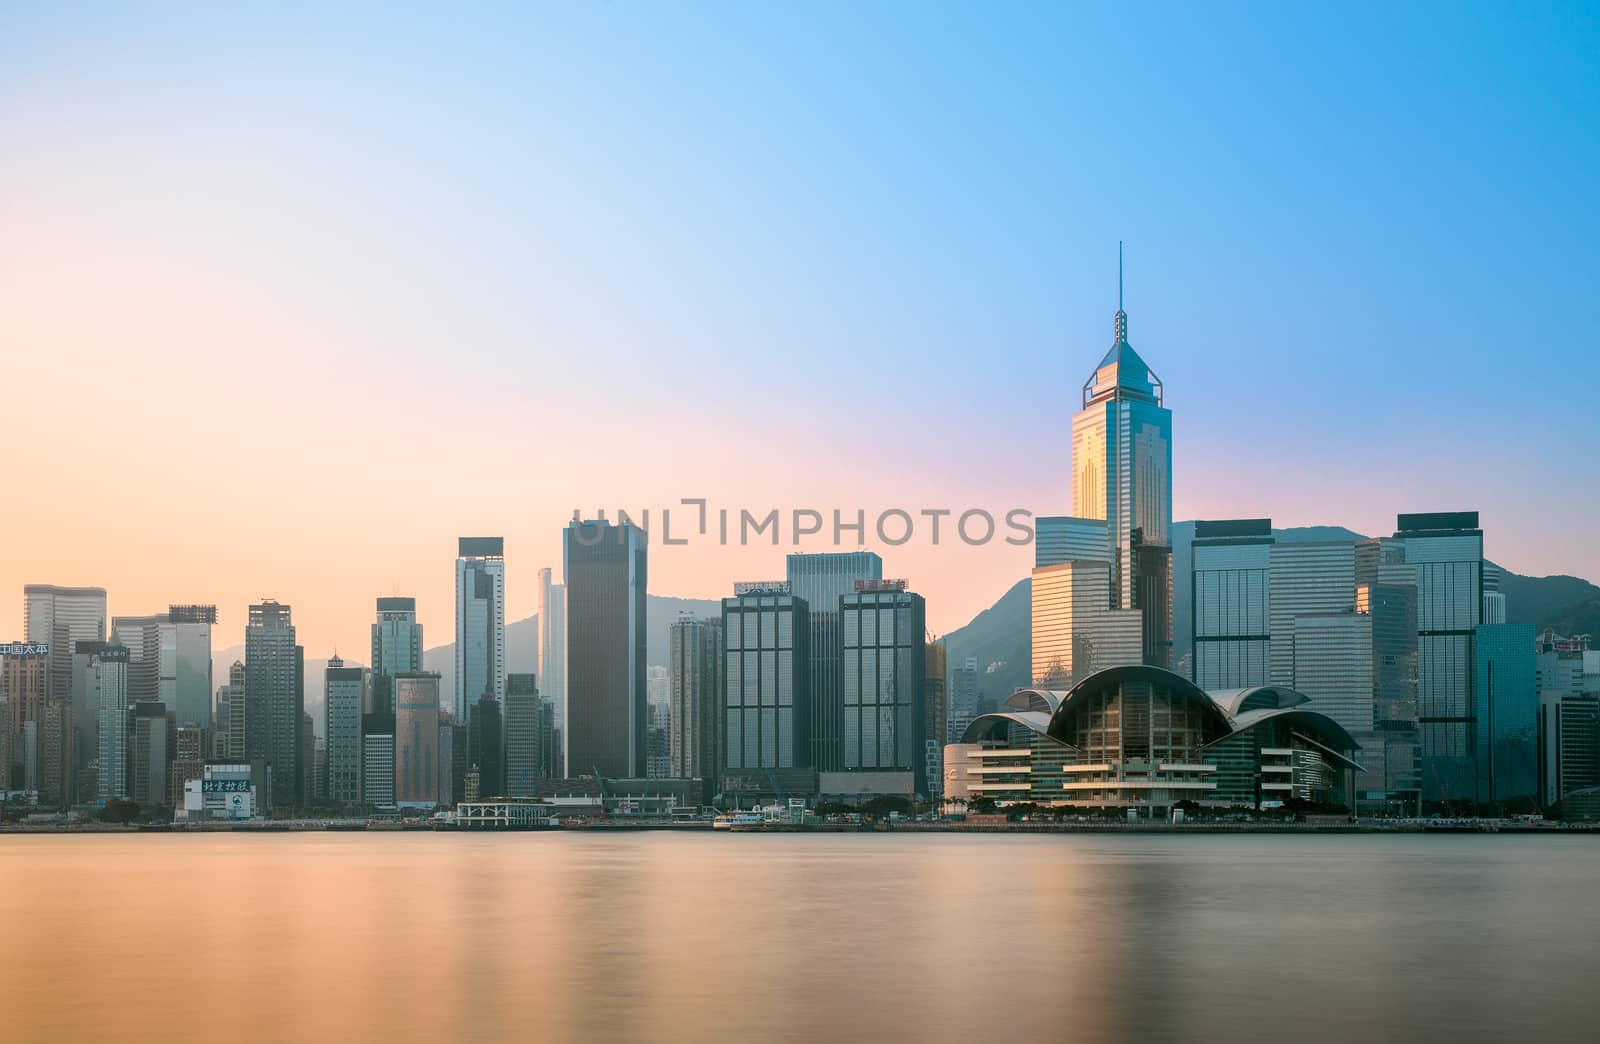 Central area of Hong Kong looking from the opposite side of Victoria harbor by Obmeetsworld